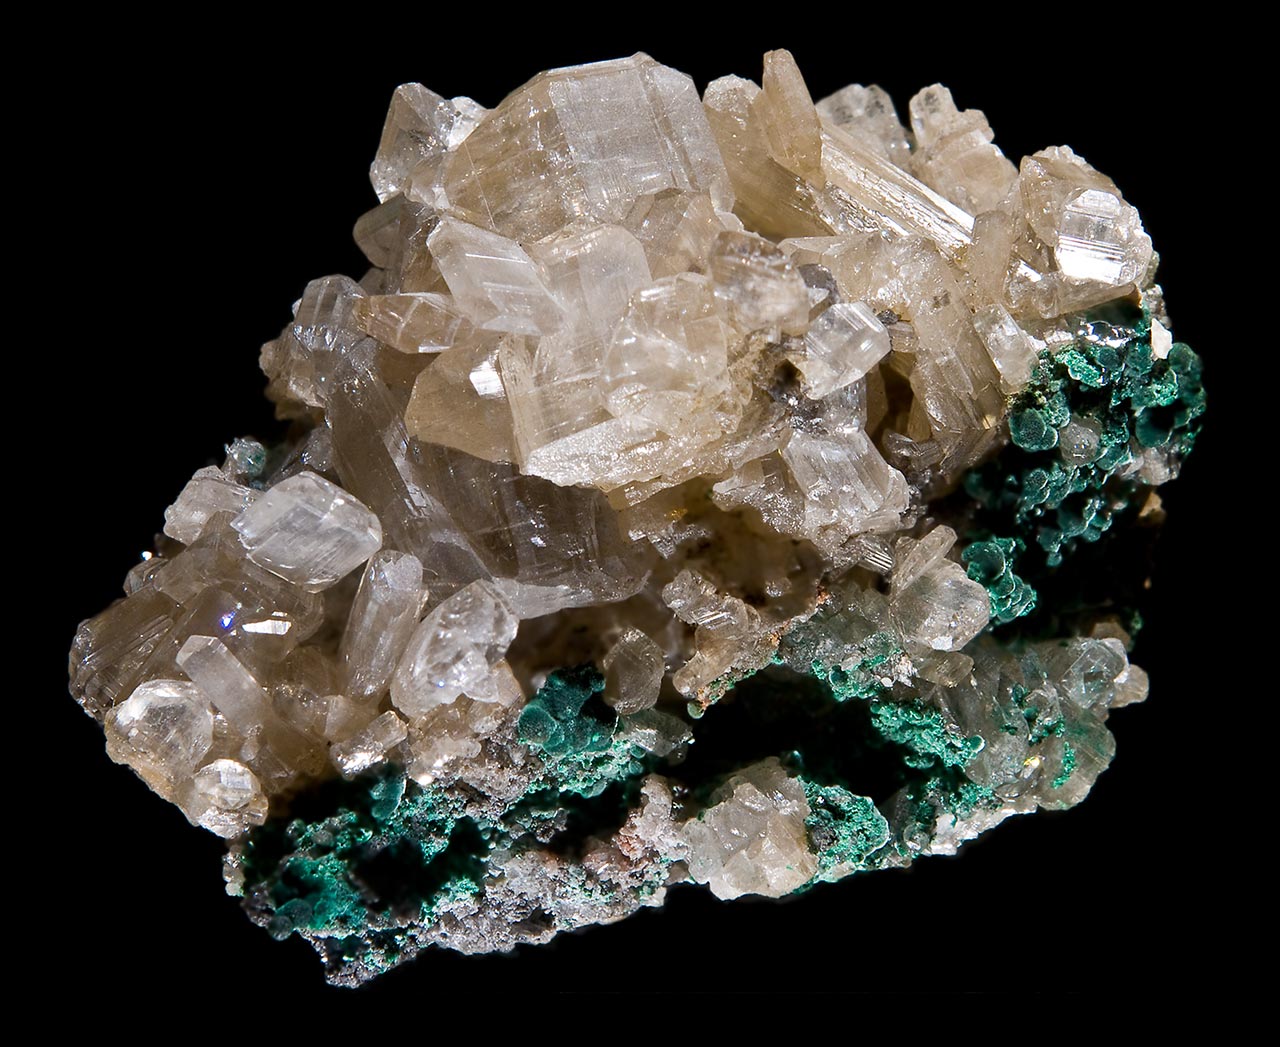 Cerussite crystals with malachite from Tsumeb, Namibia